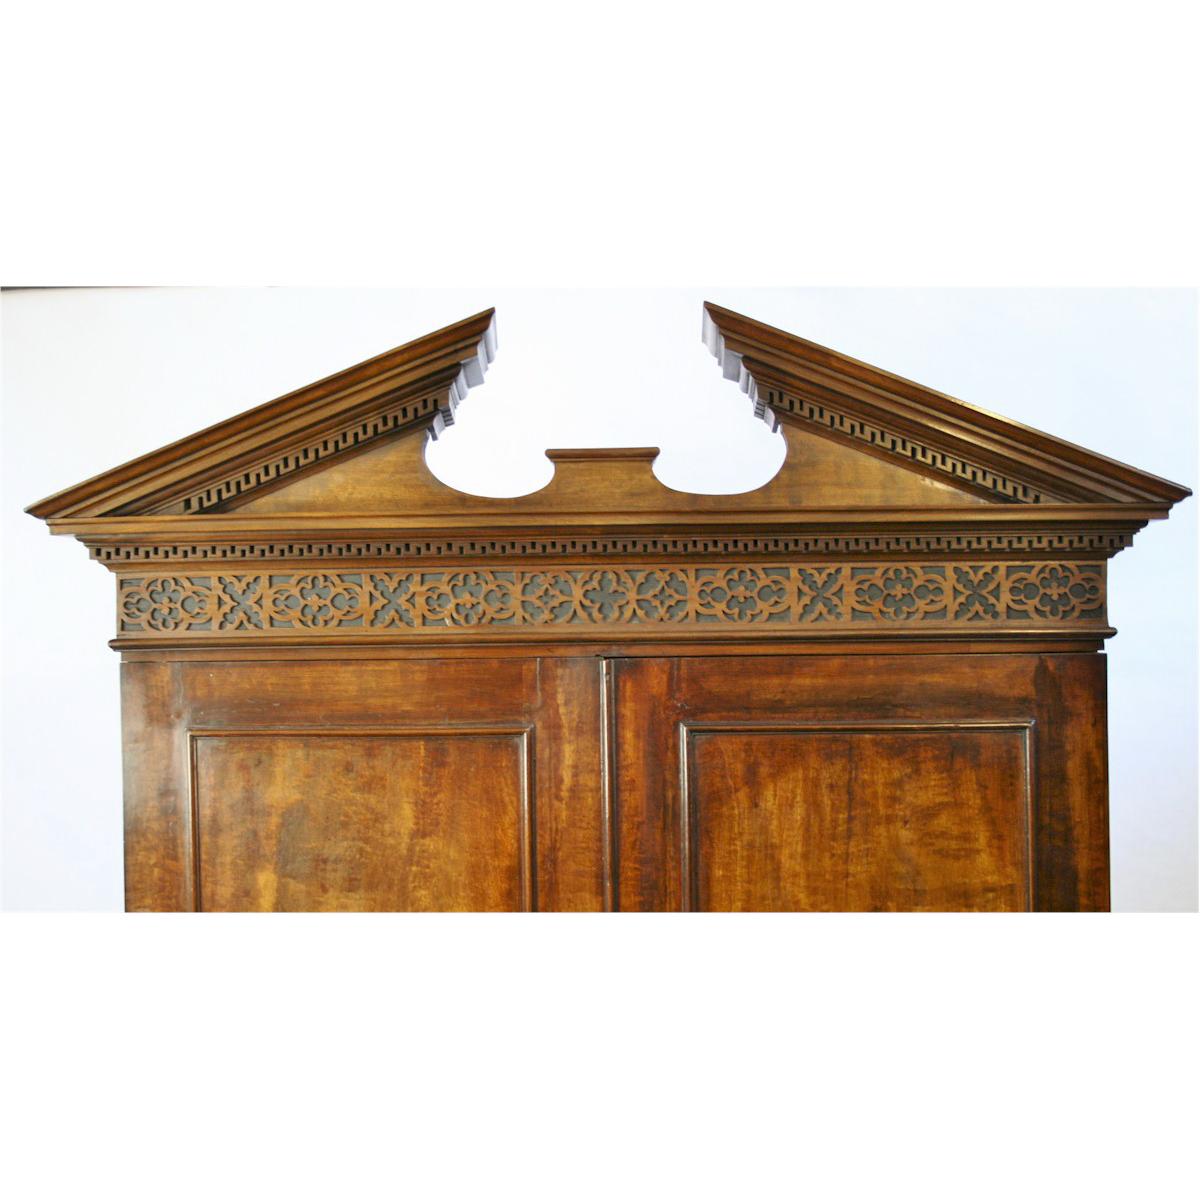 George III Chippendale Mahogany Bureau Cabinet with Pediment In Good Condition For Sale In Barrington, IL